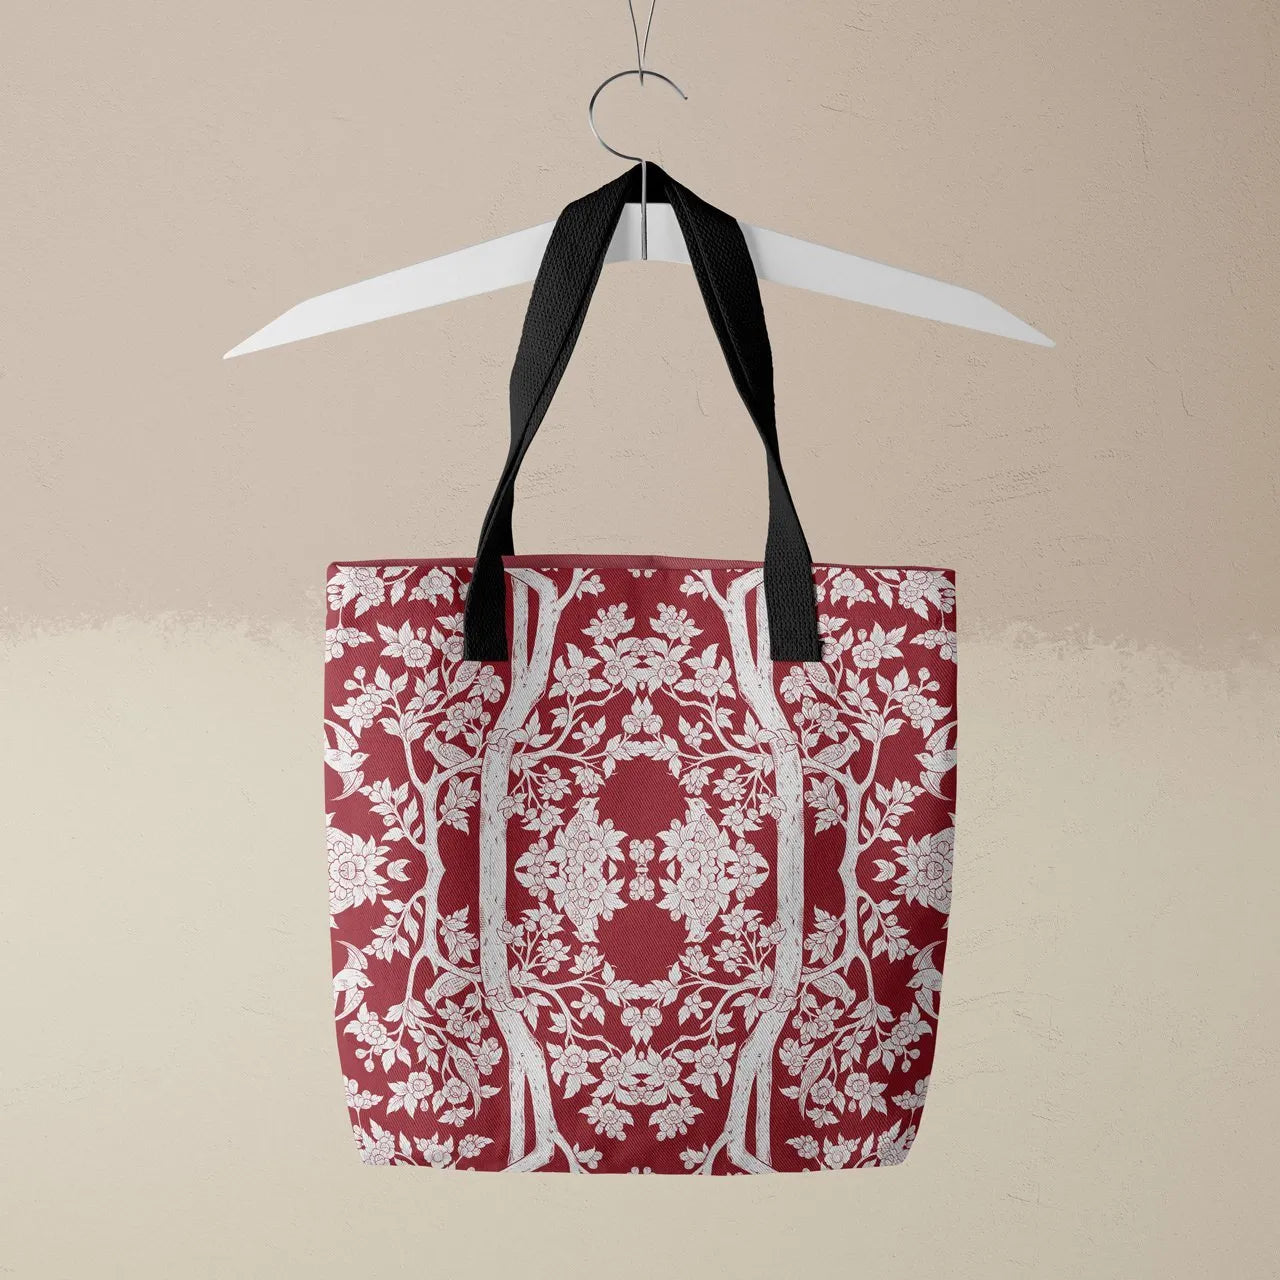 Aviary Tote - Rosella - Heavy Duty Reusable Grocery Bag - Tote Bags - Aesthetic Art